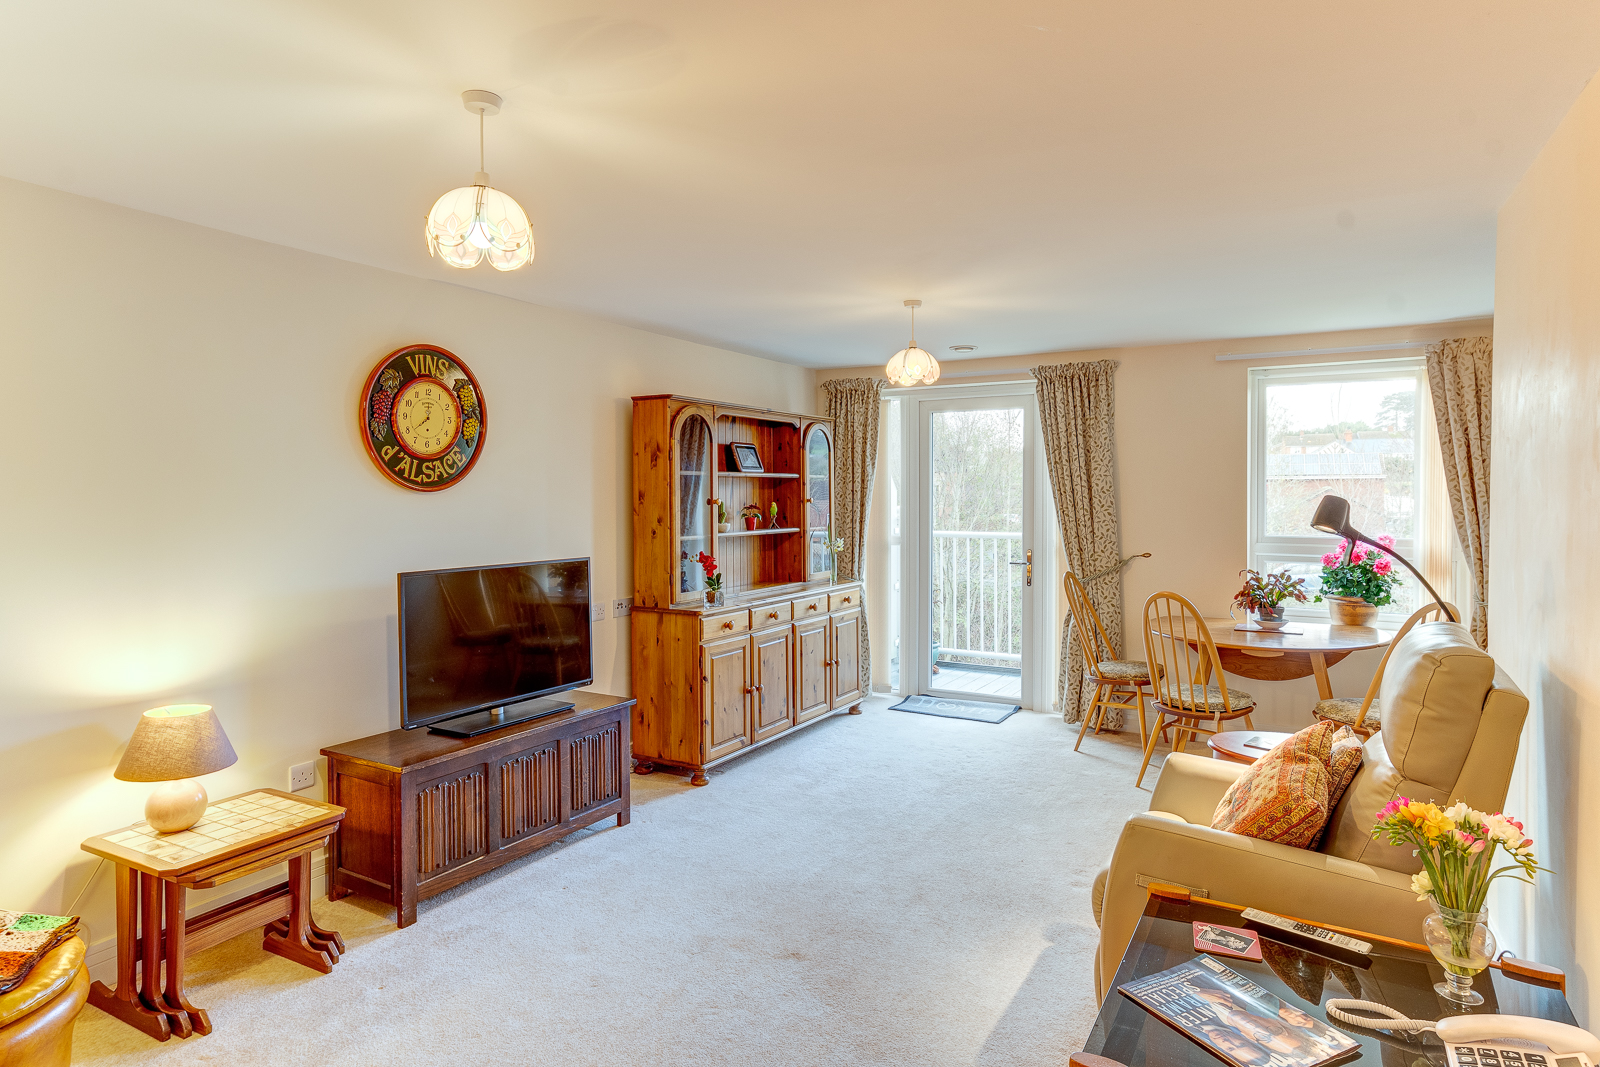 1 bed  for sale in Hanbury Road, Droitwich  - Property Image 8